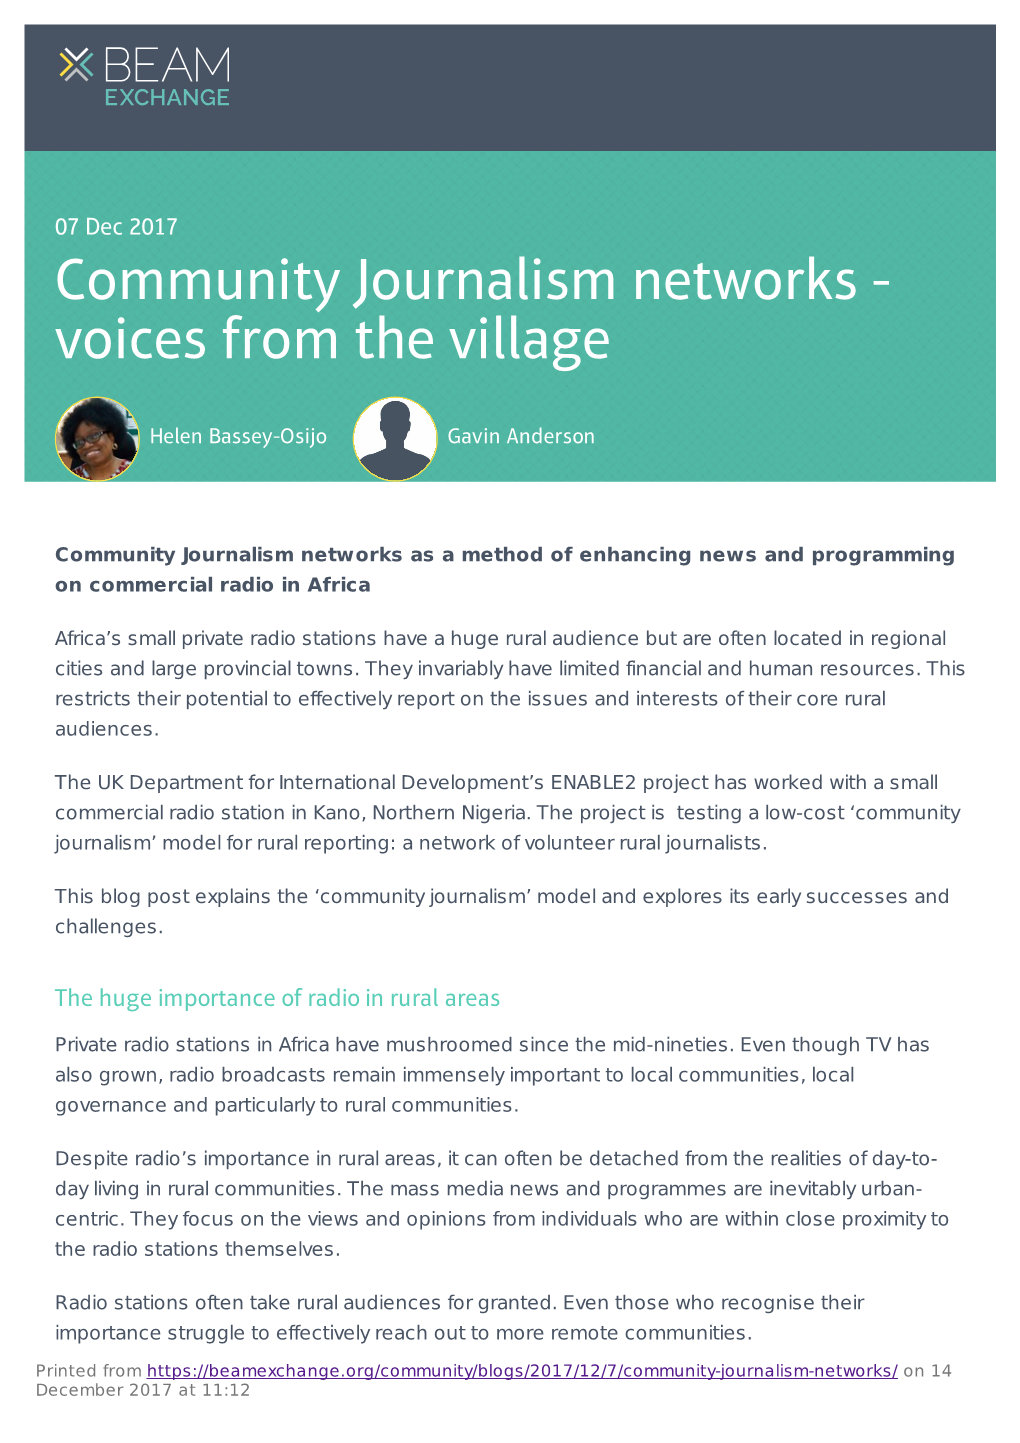 Community Journalism Networks - Voices from the Village